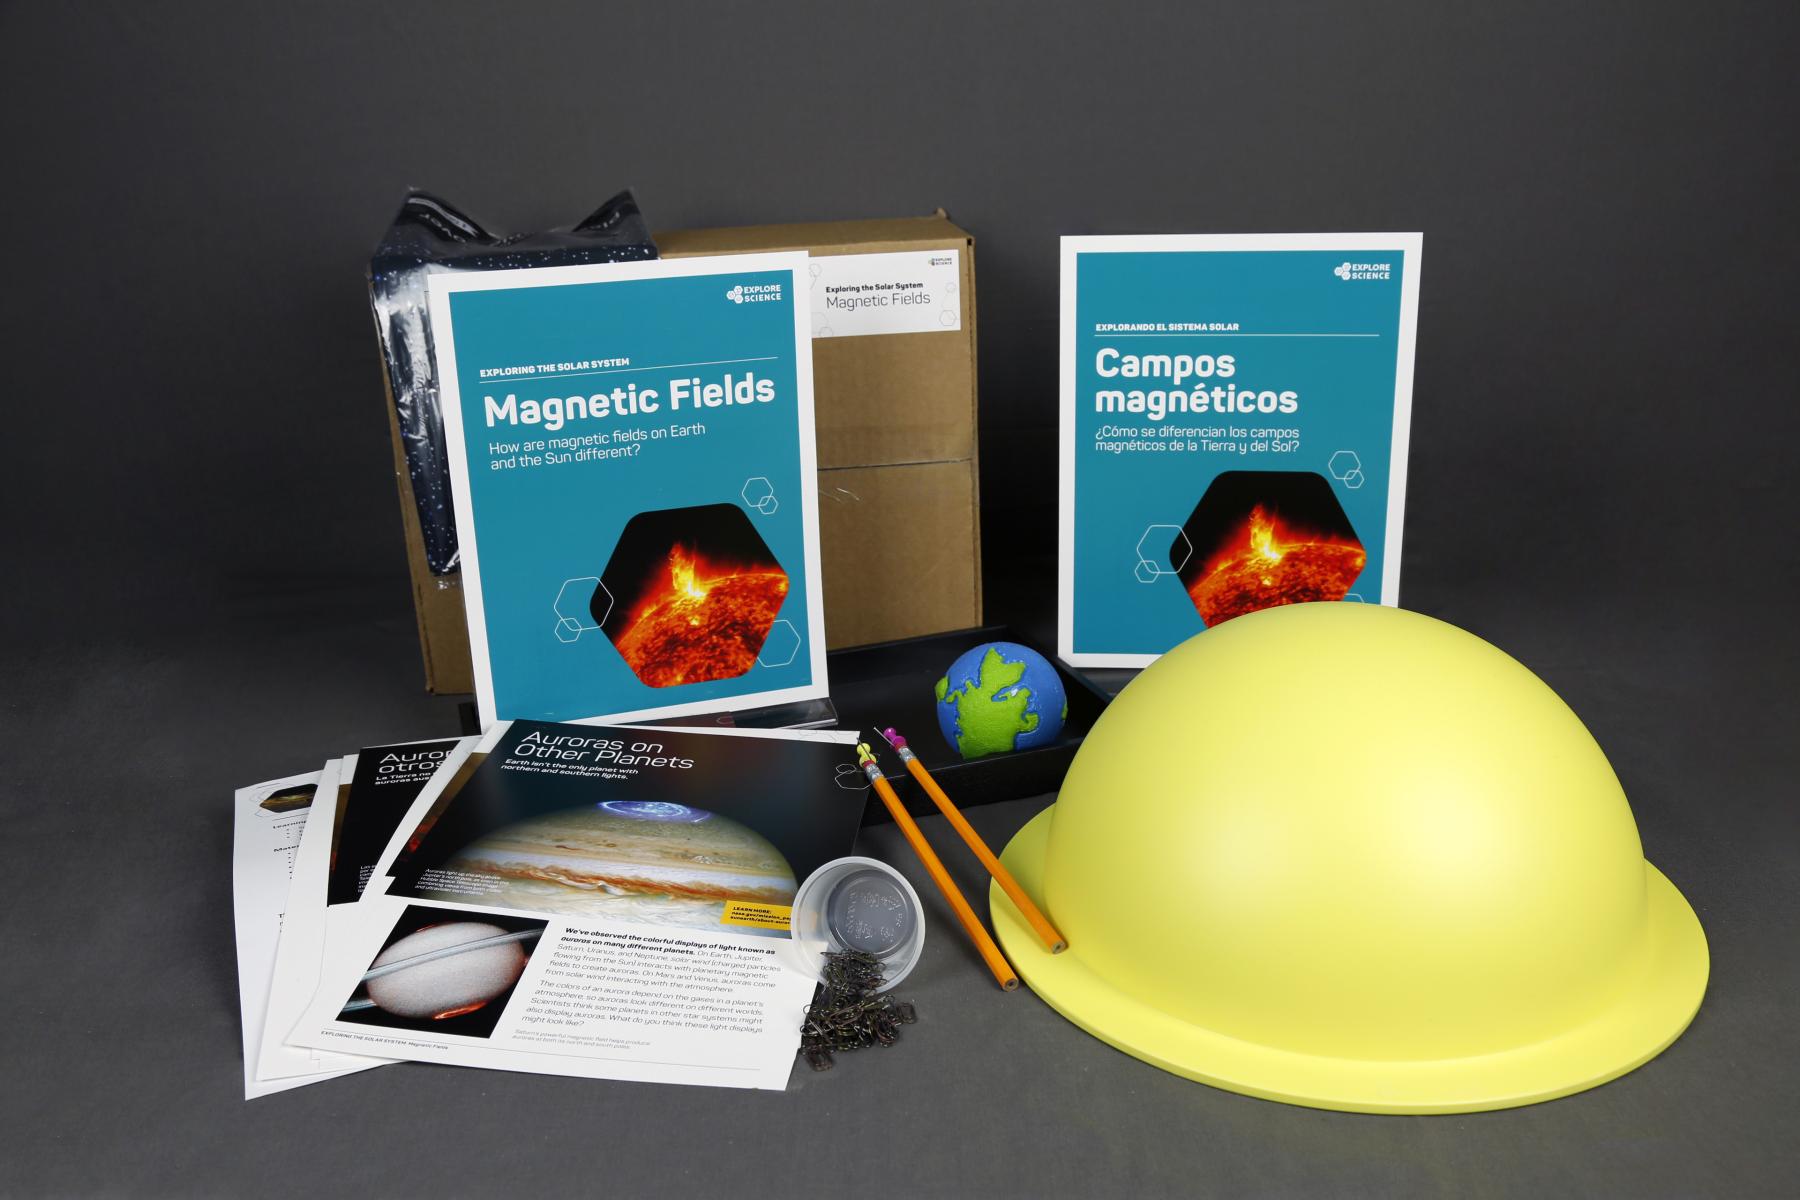 Photo of the various materials in the Magnetic Fields kit